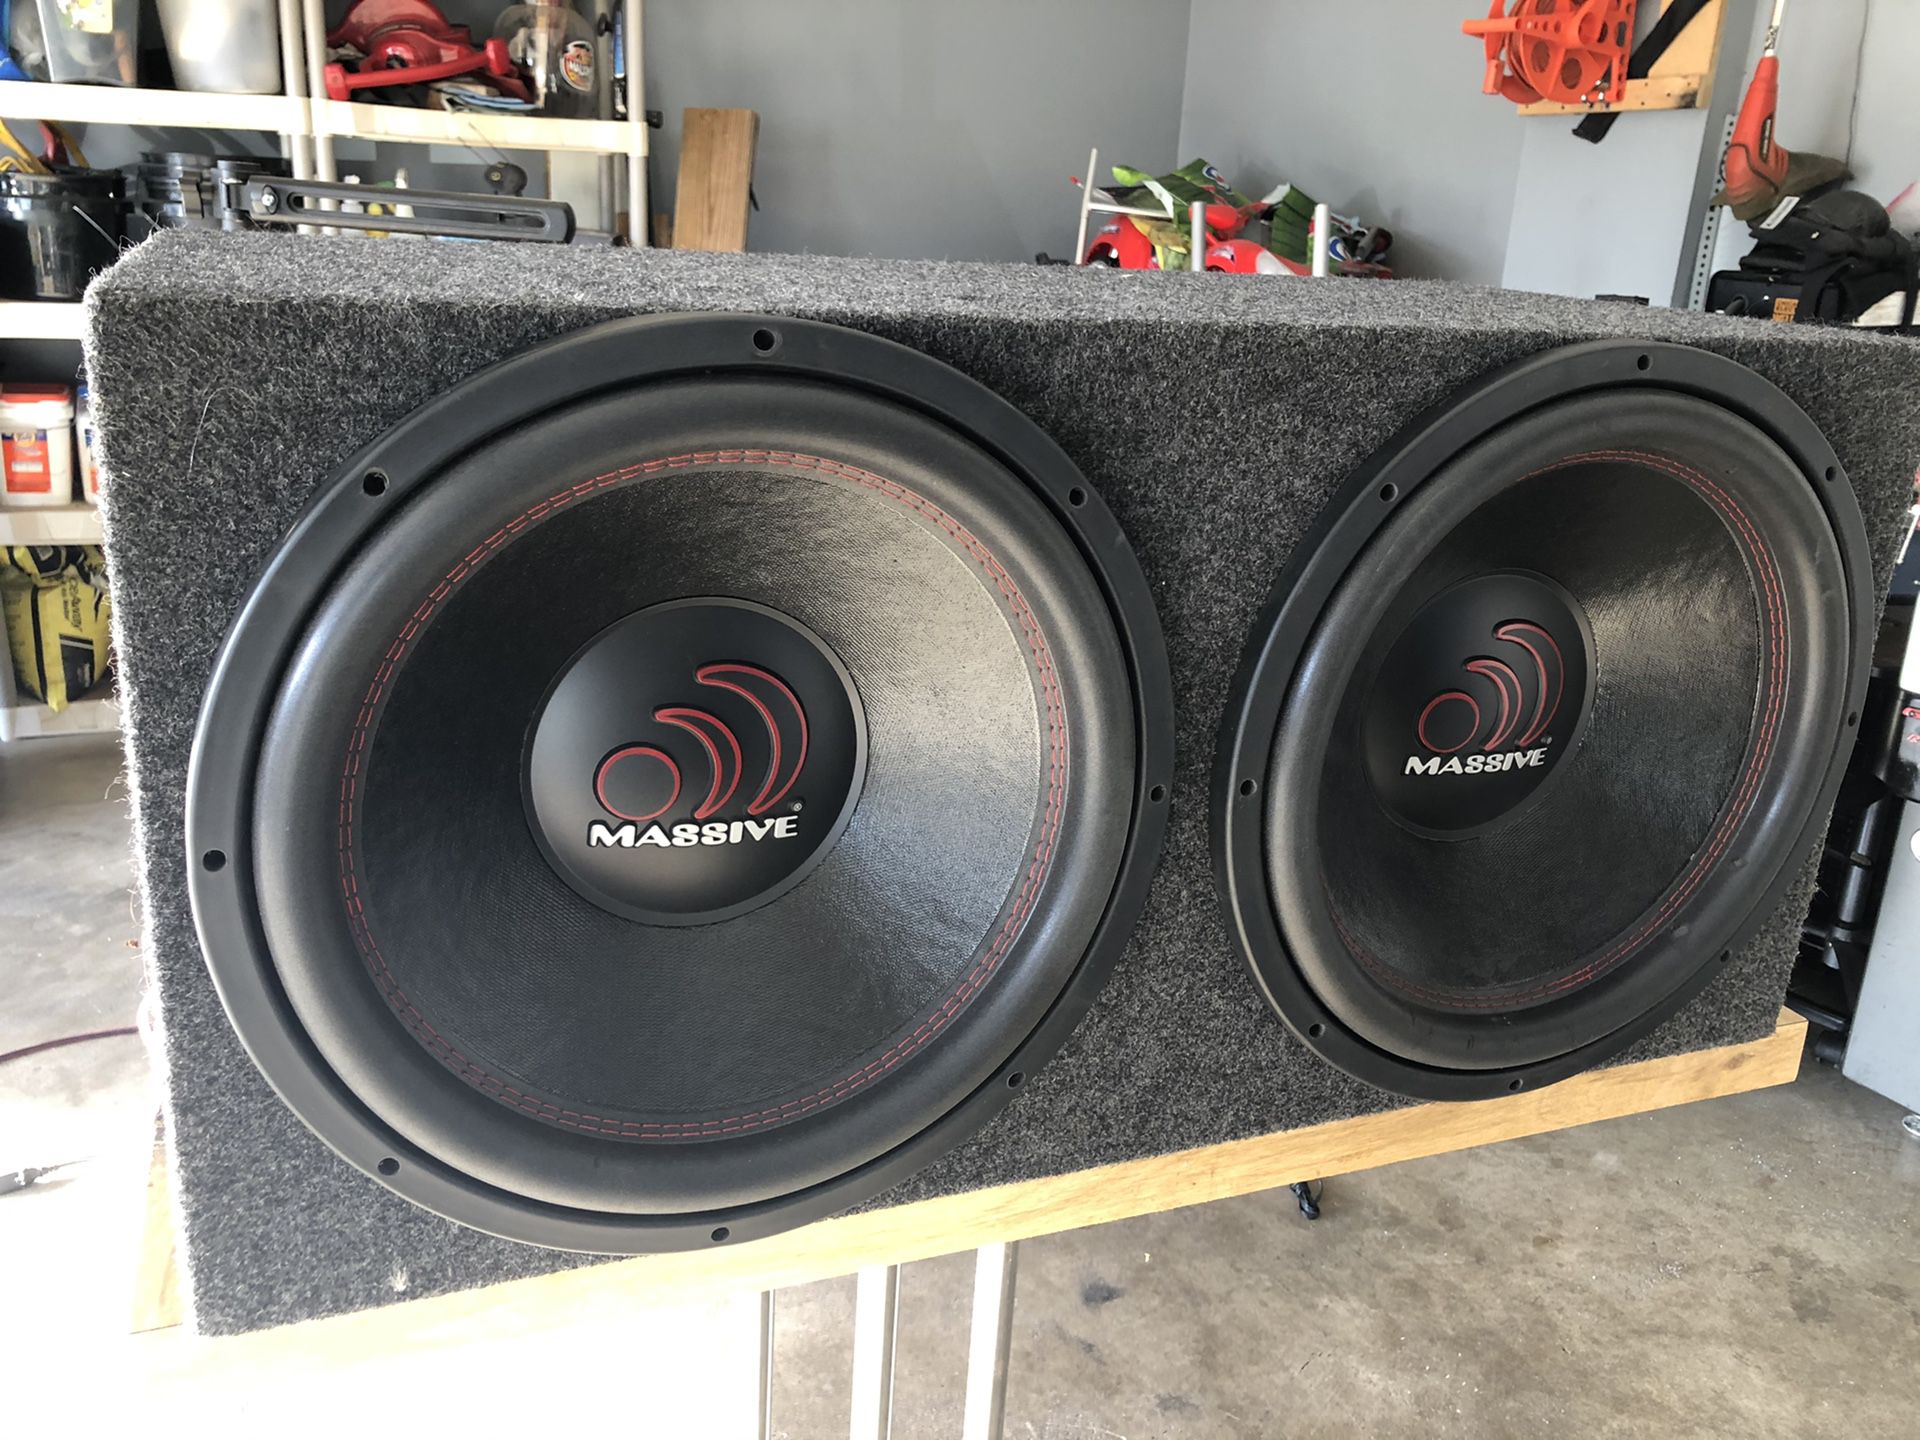 15 inch massive subwoofers and amp..........